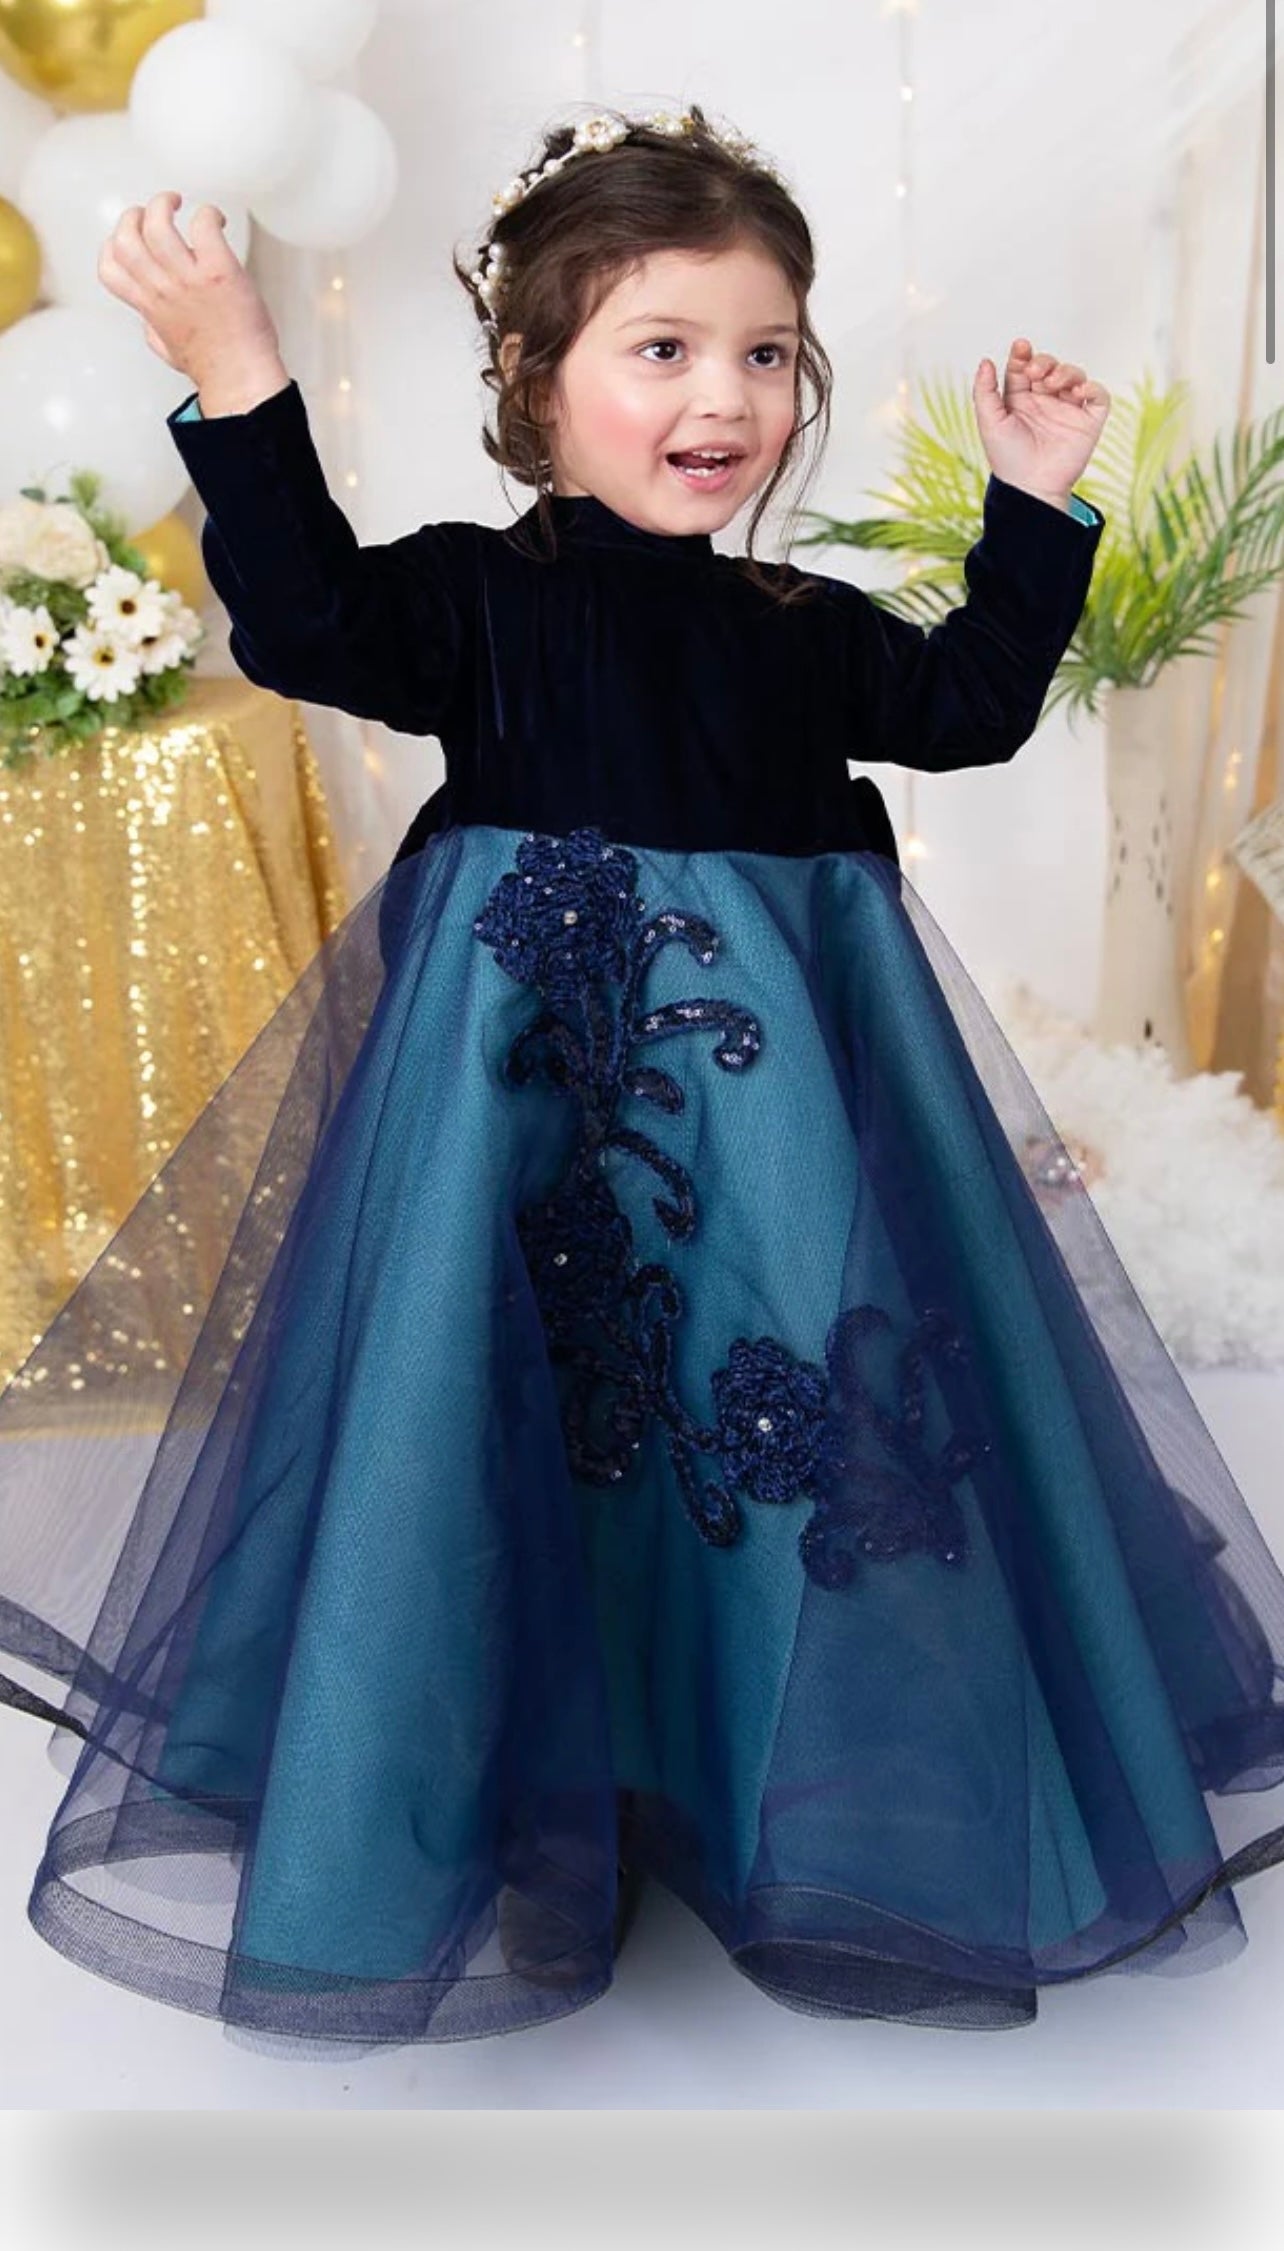 Teal and black Tailed Princess dress for girls